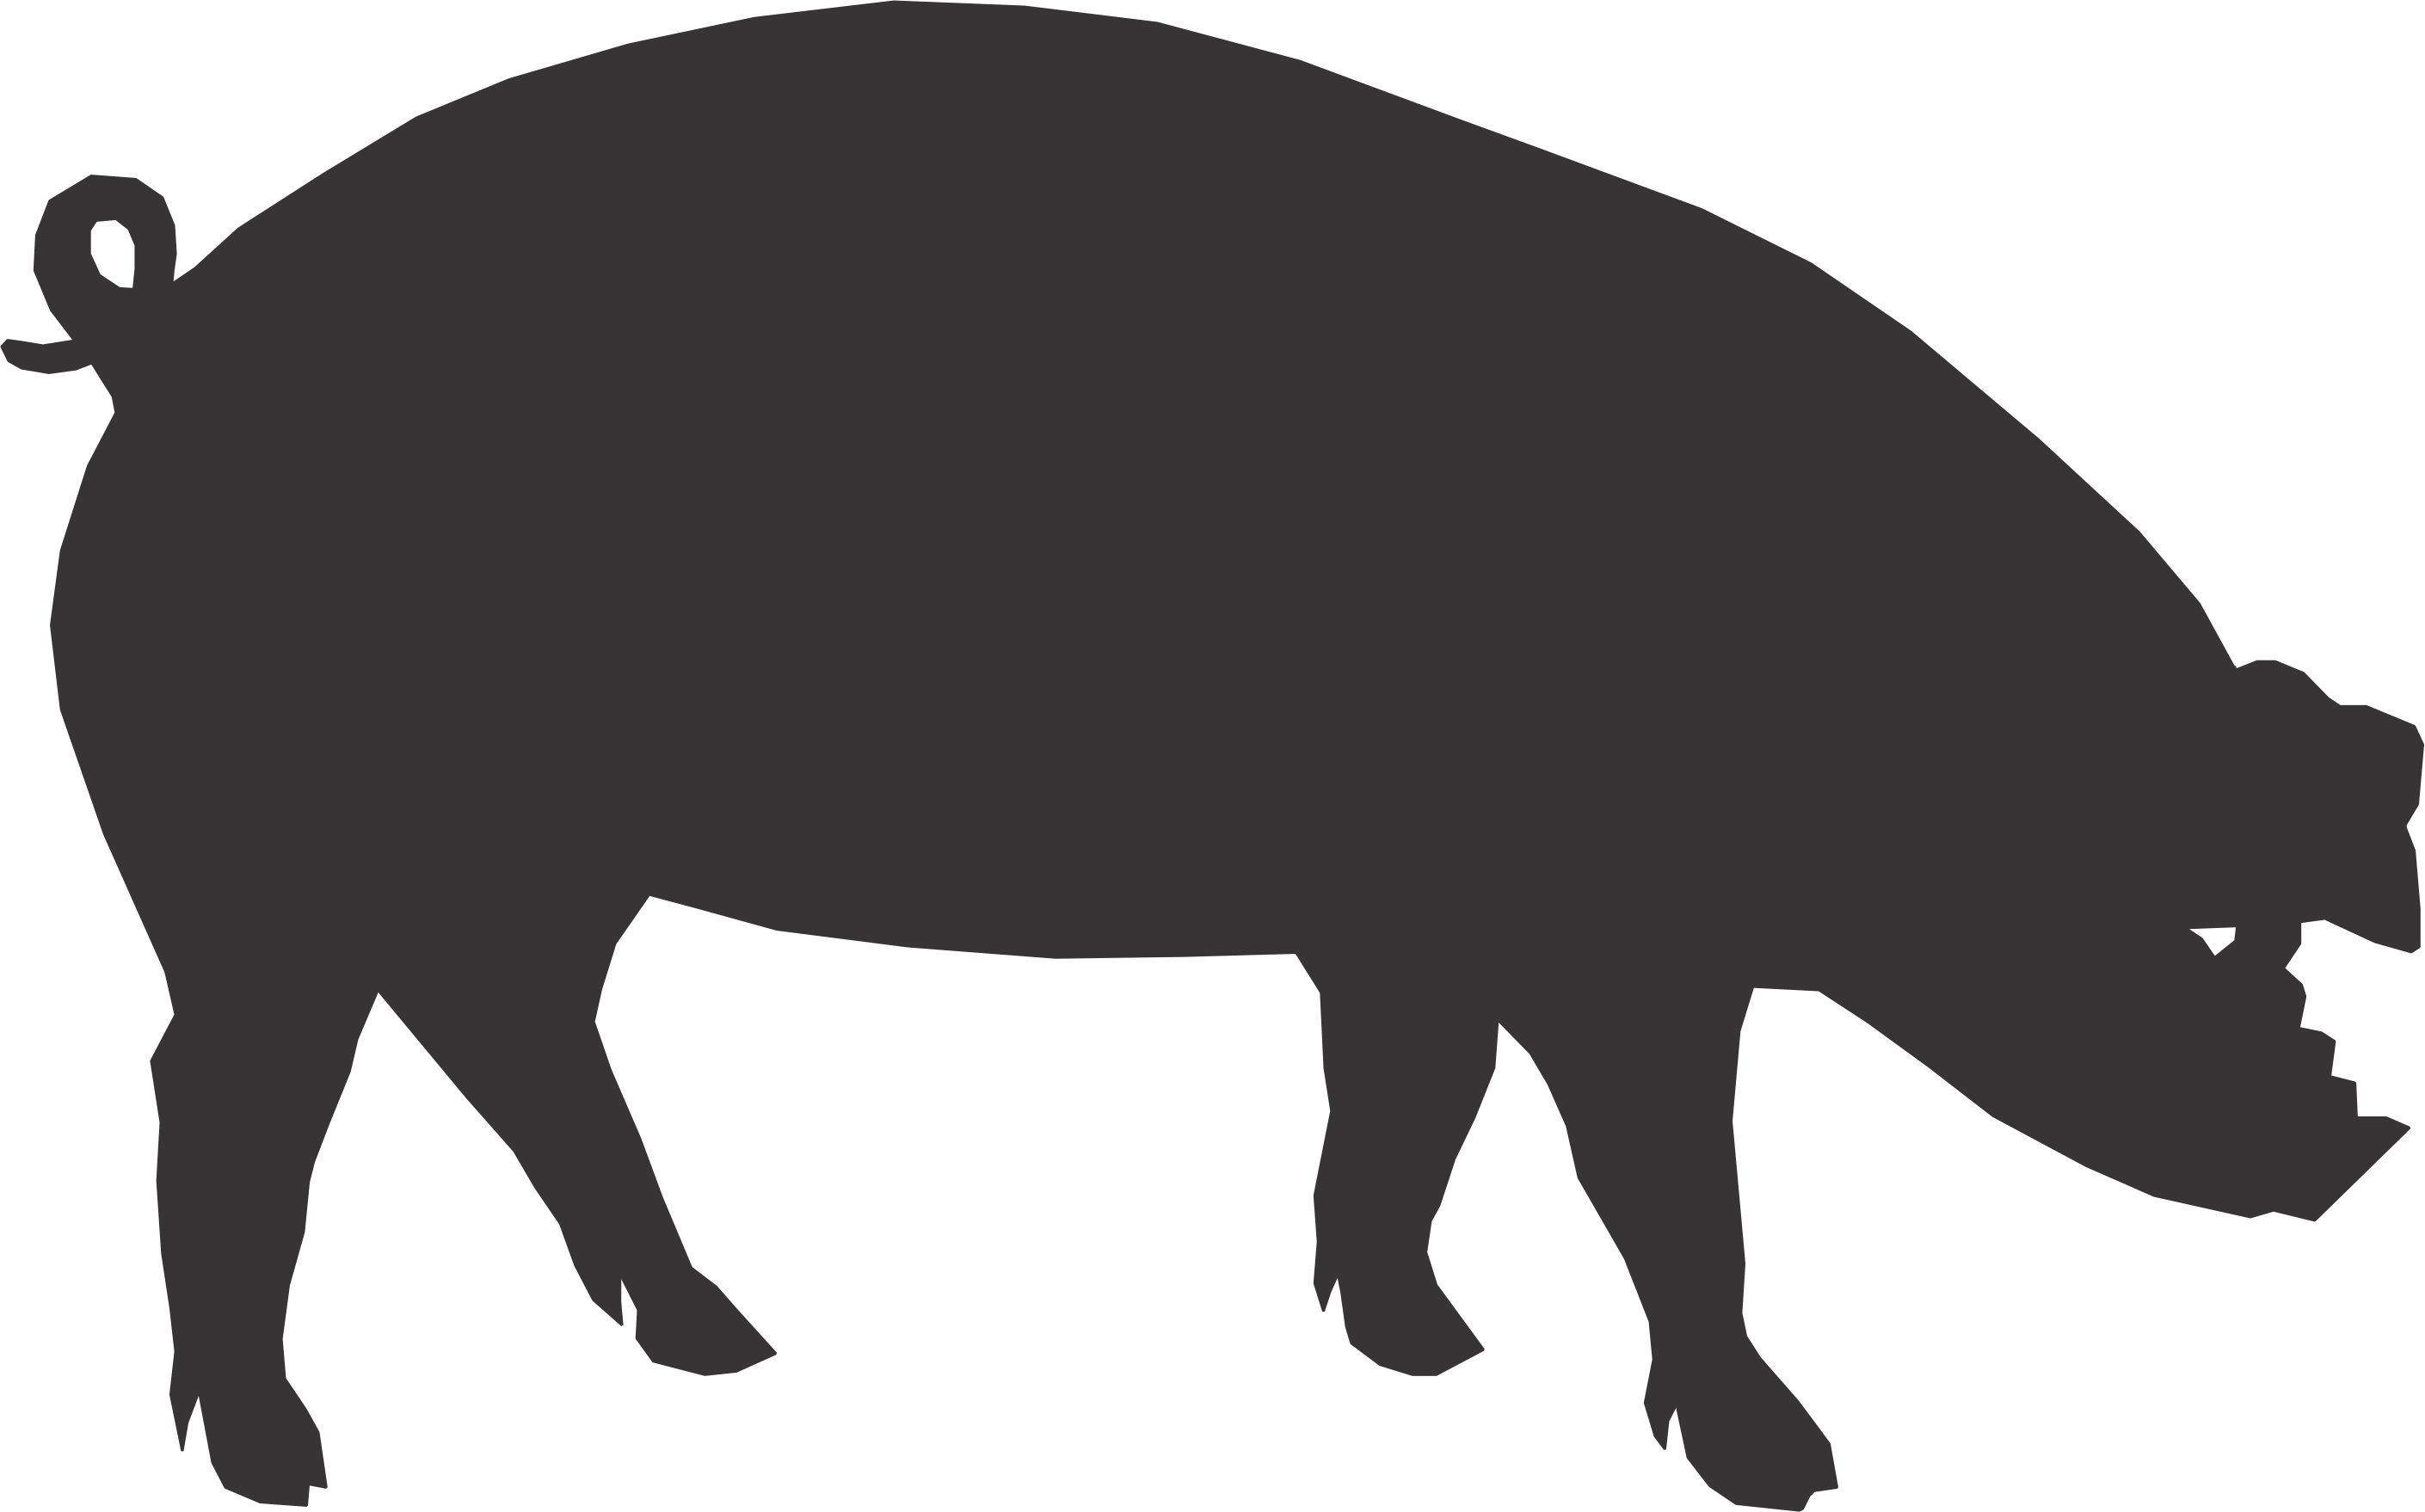 Free Pig Silhouette, Download Free Clip Art, Free Clip Art